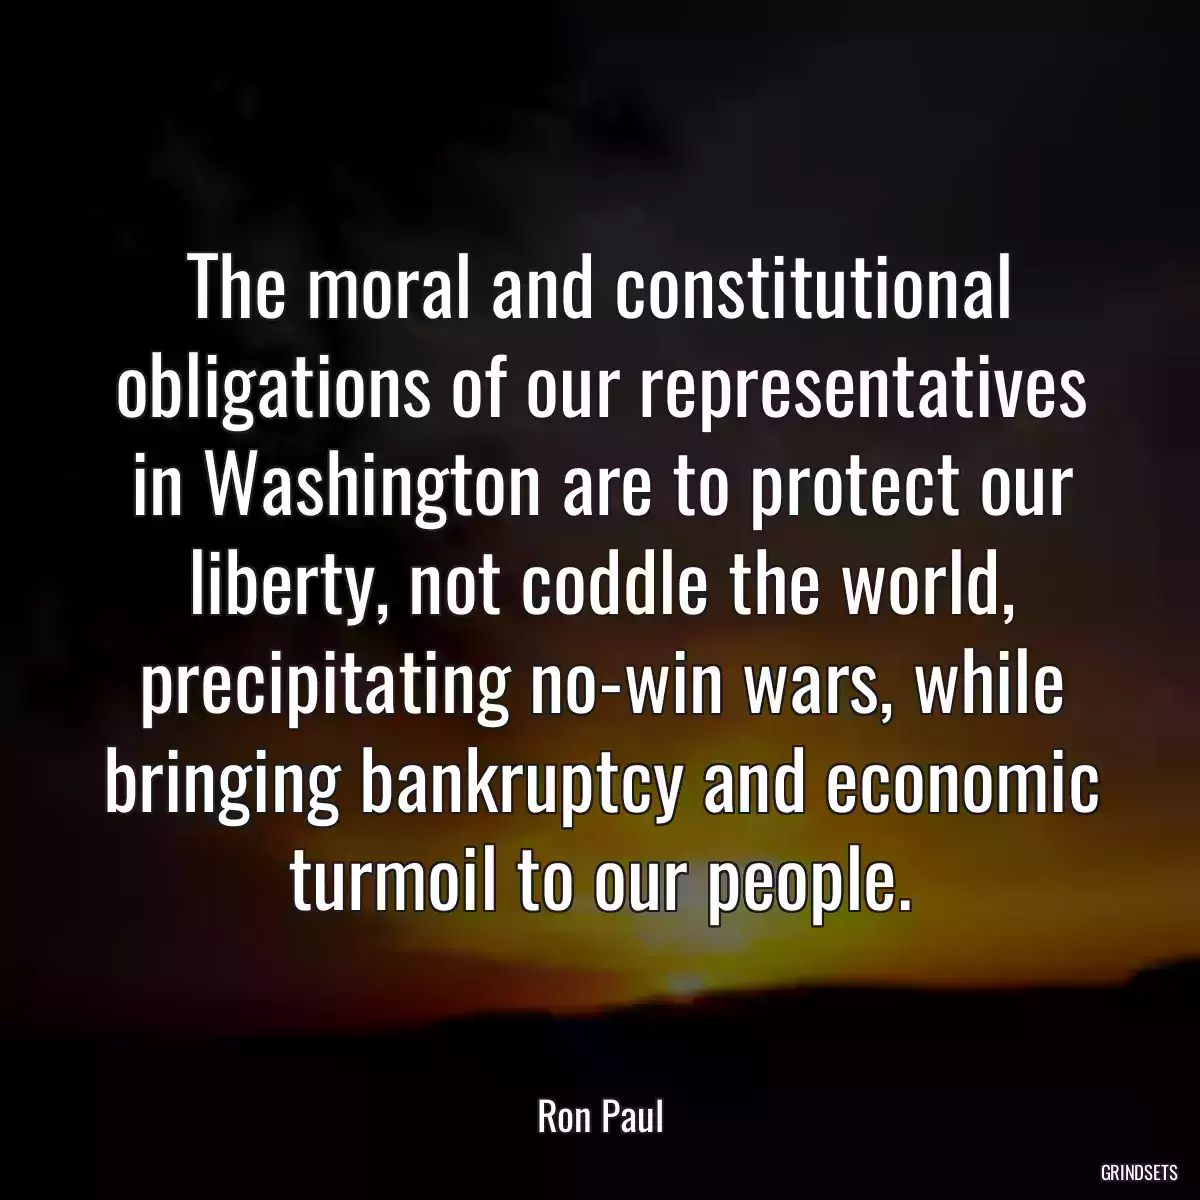 The moral and constitutional obligations of our representatives in Washington are to protect our liberty, not coddle the world, precipitating no-win wars, while bringing bankruptcy and economic turmoil to our people.